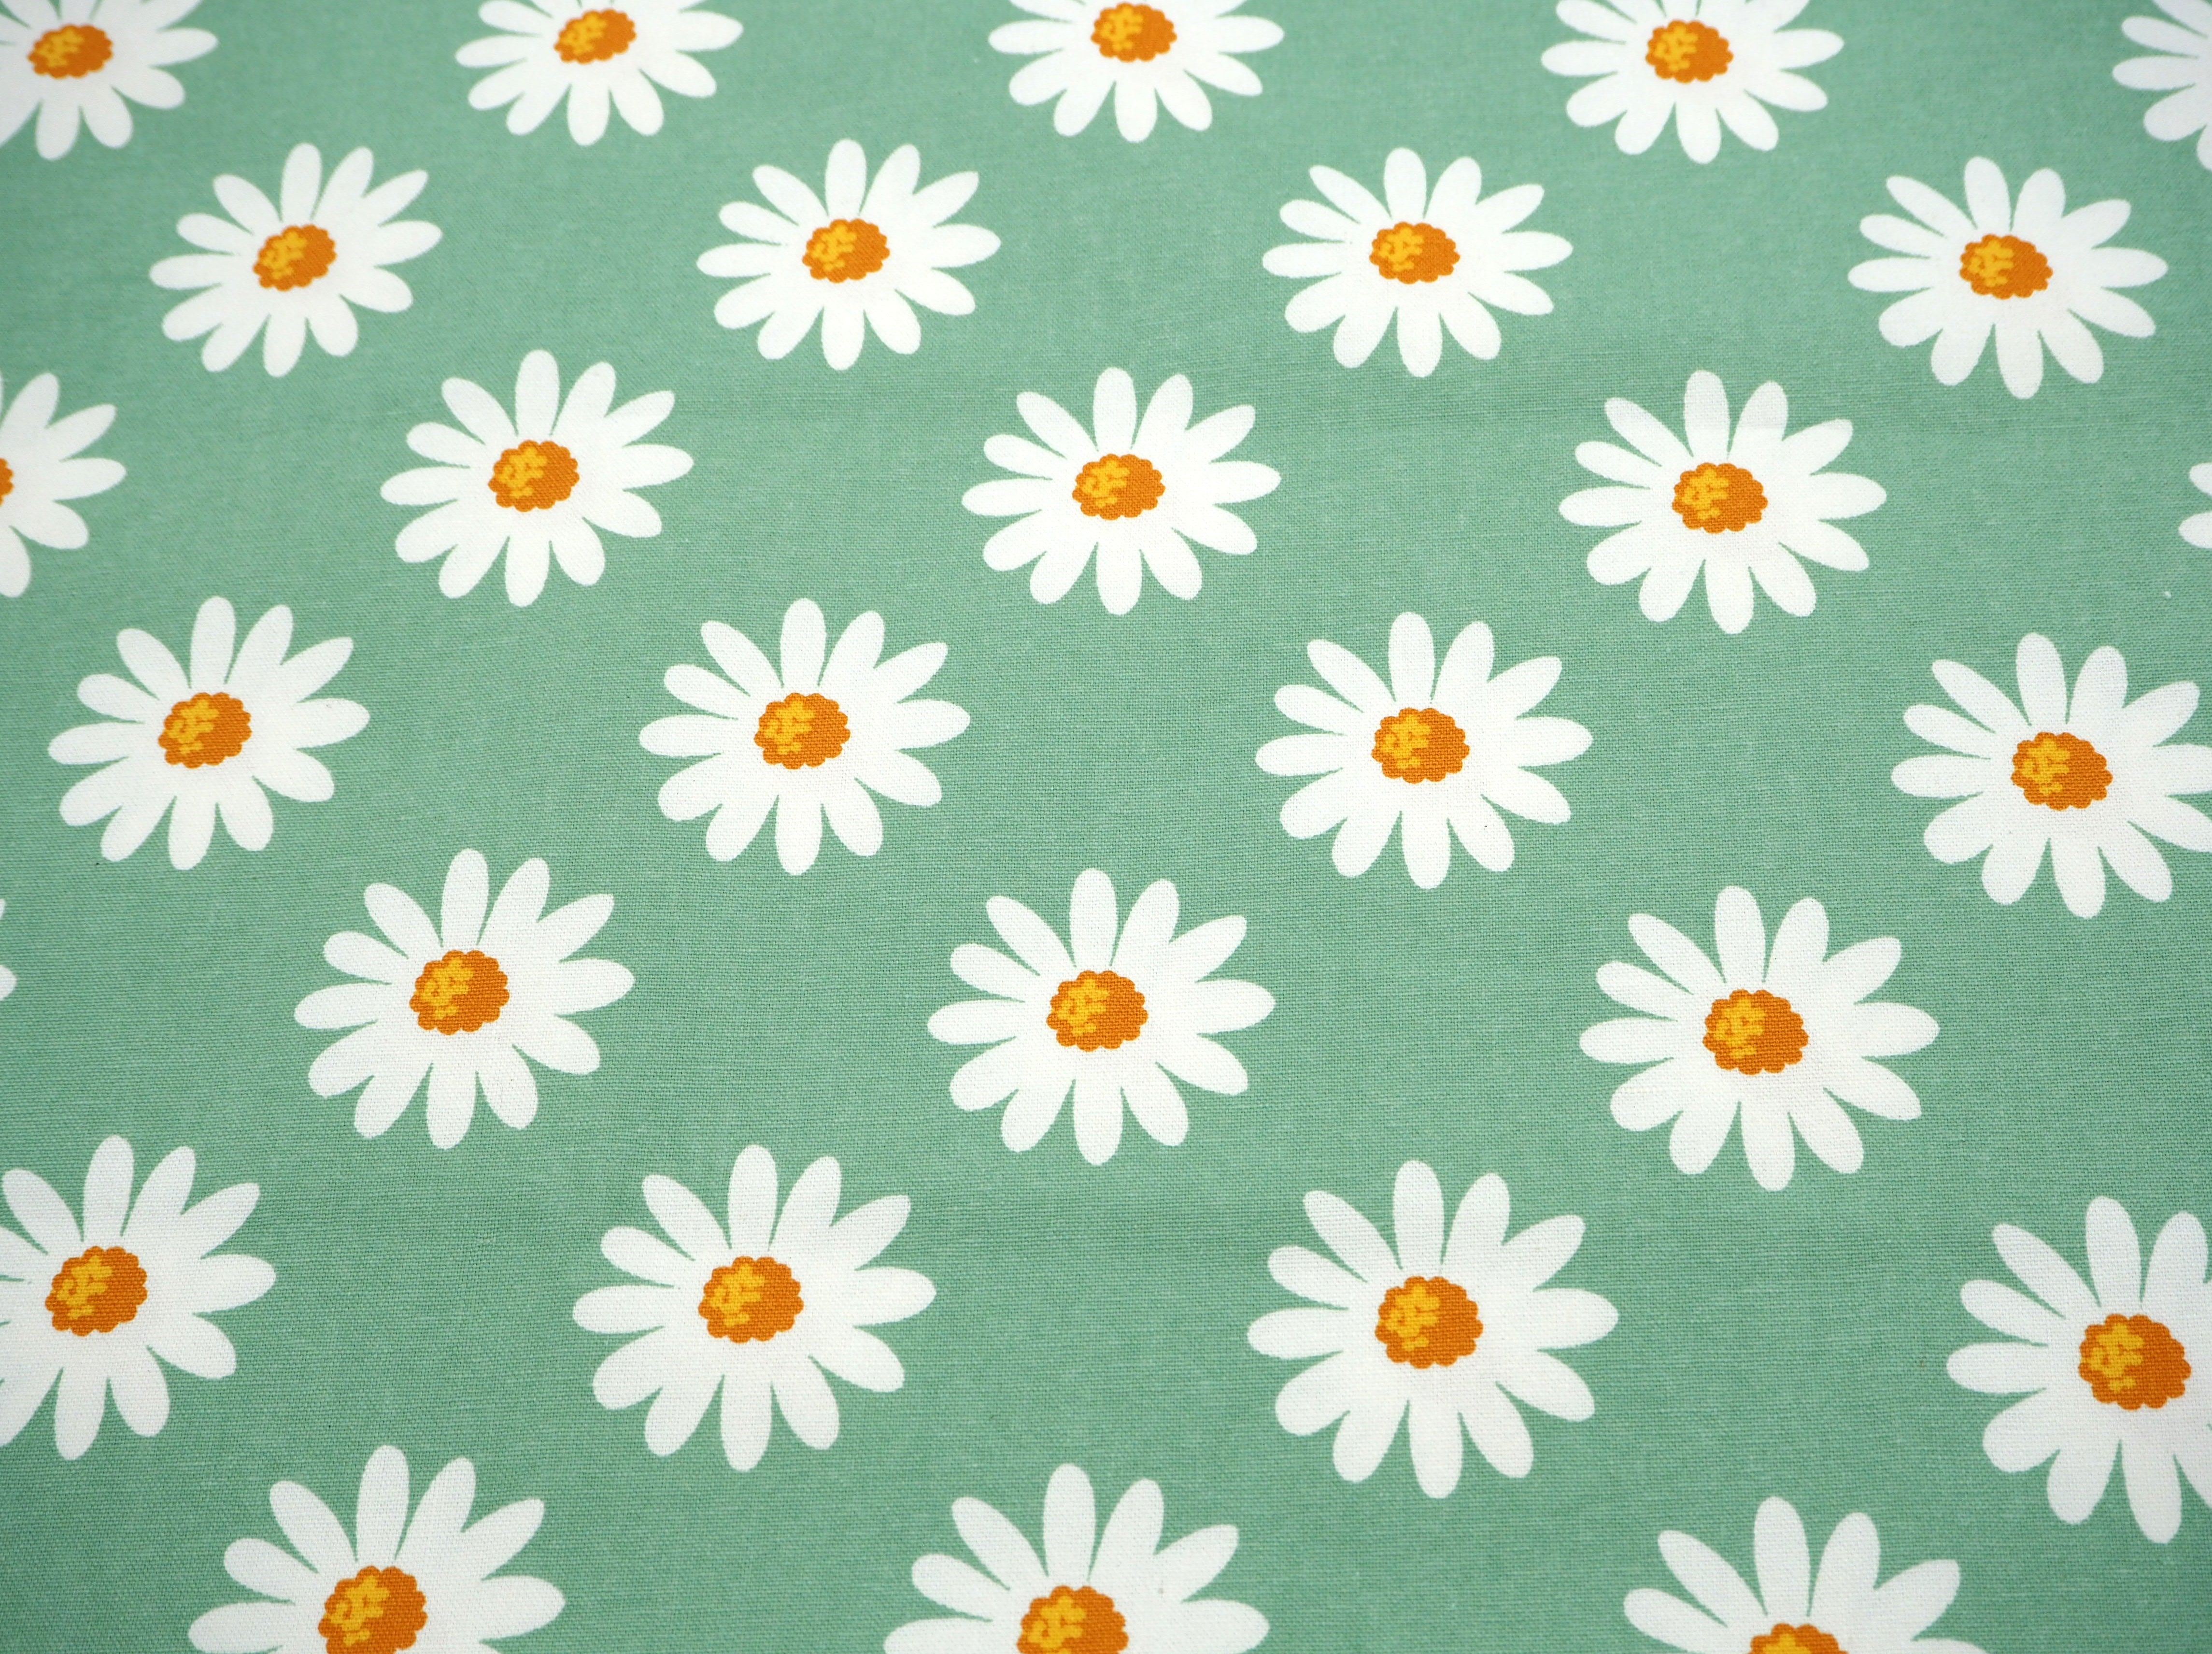 Fabric view of A Sack Of Wheat, featuring spring daisy's on classic vintage green background , 100% cotton fabric